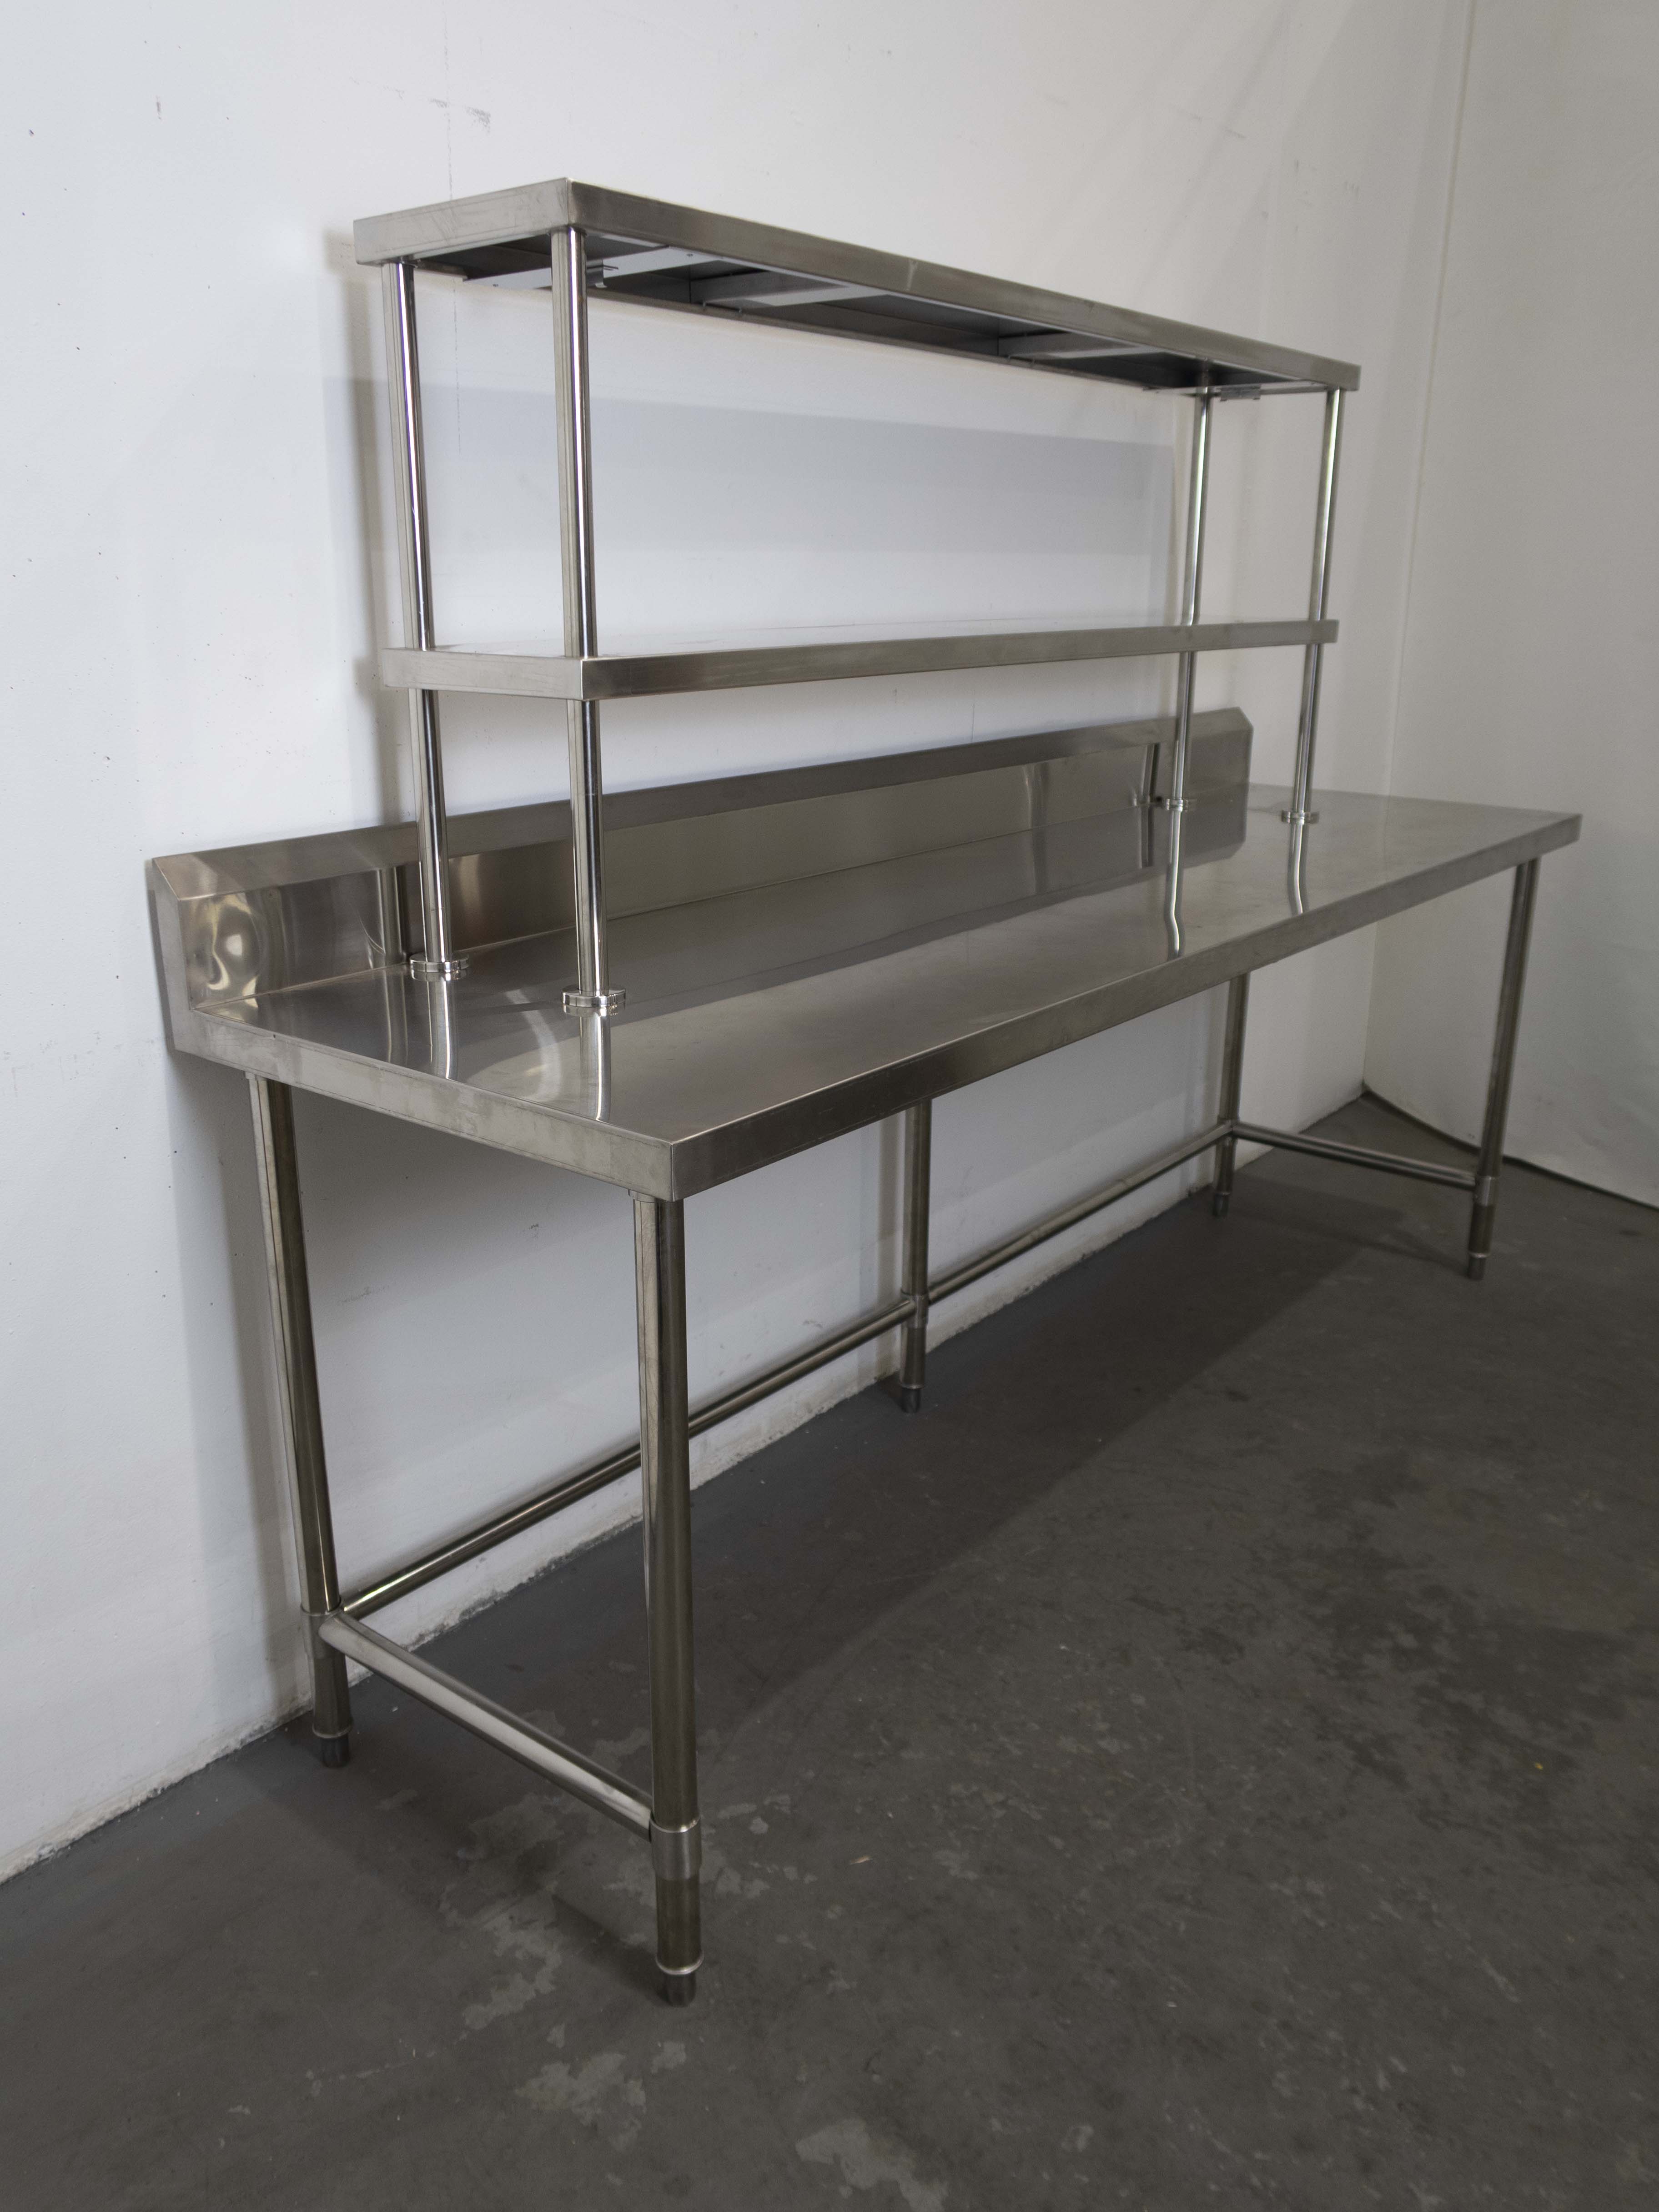 Thumbnail - Stainless Steel Bench with 2 Tier Over Bench Shelving